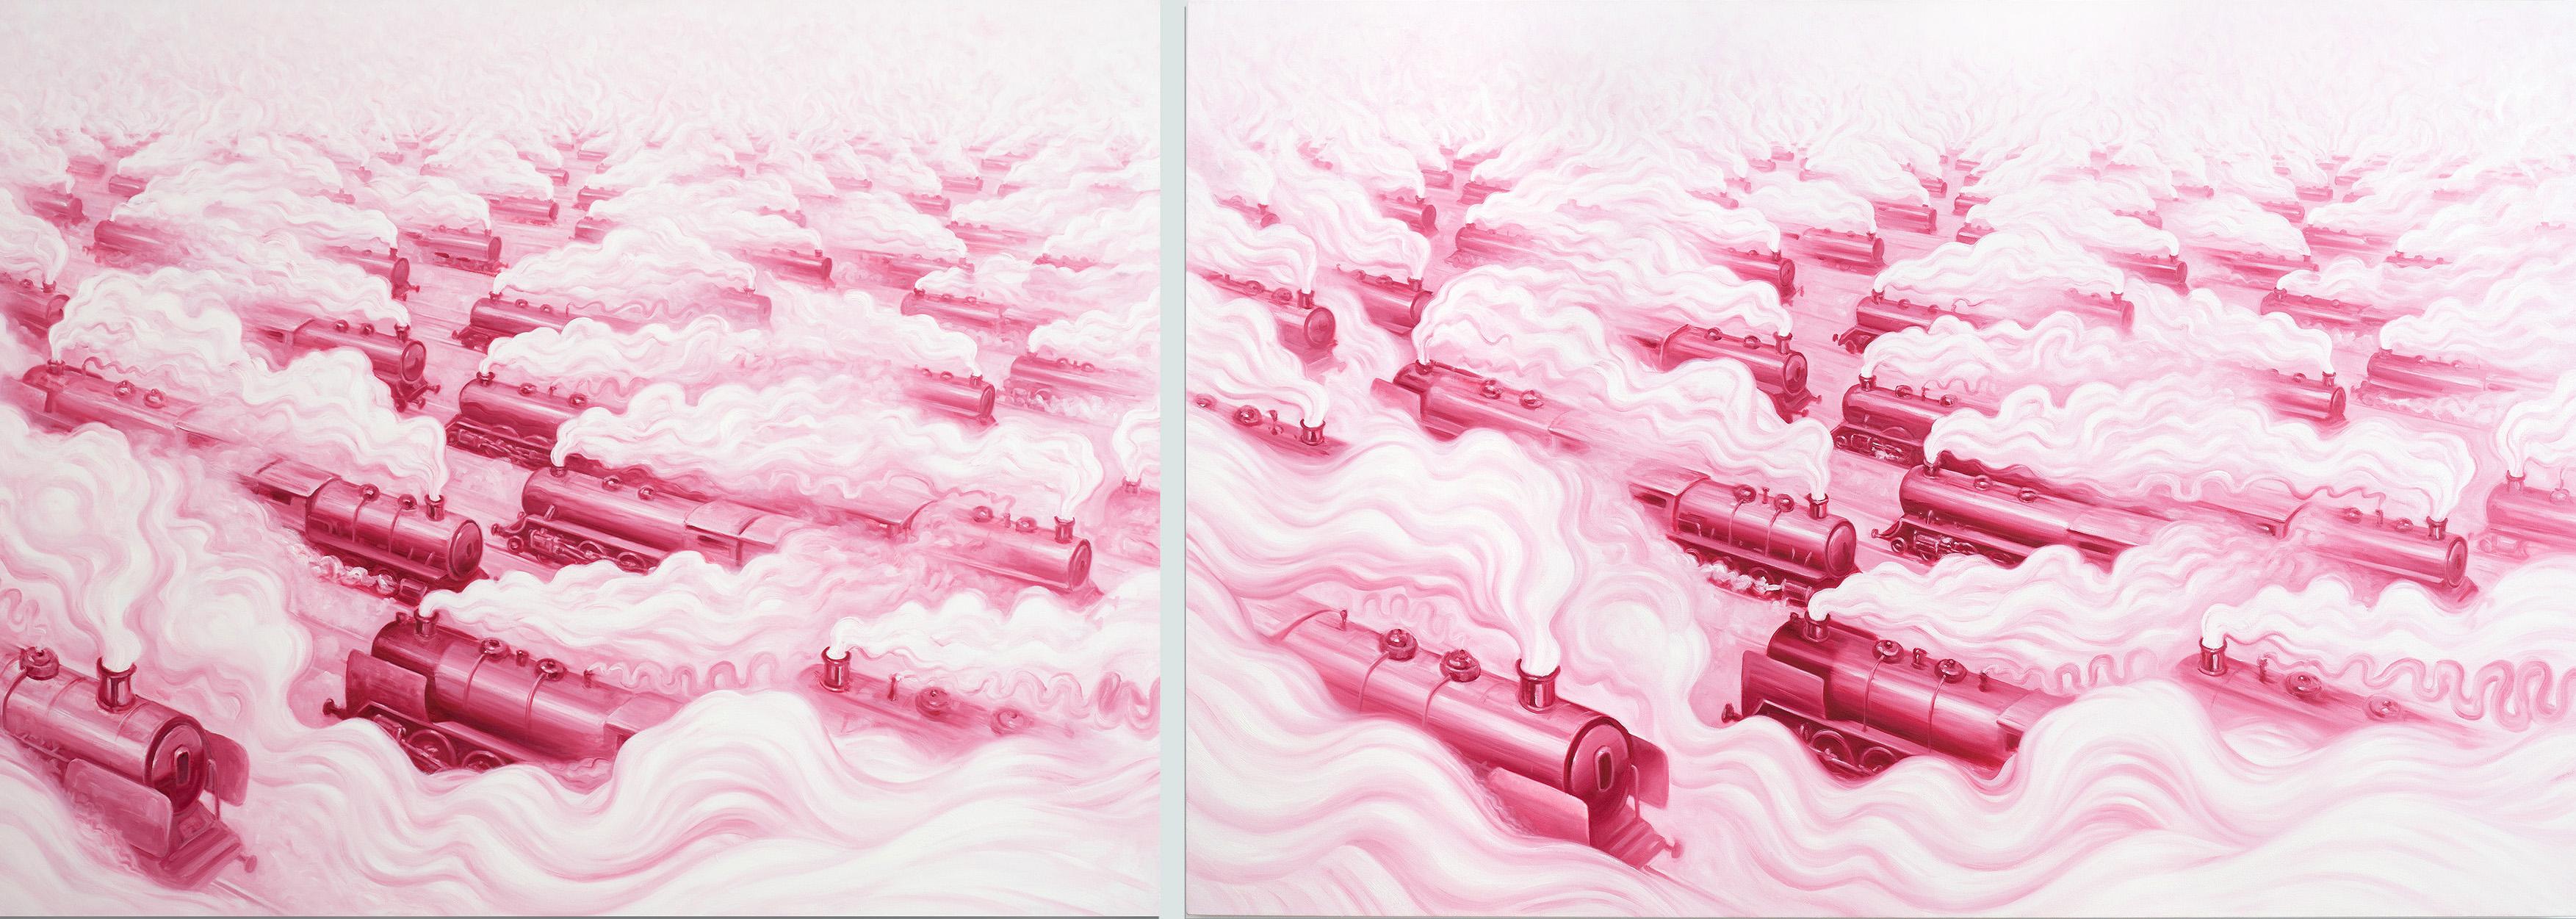 Pink Freud's Dream (Pink Freud and the Pleasant Horizon) (diptych in 2 panels) For Sale 3